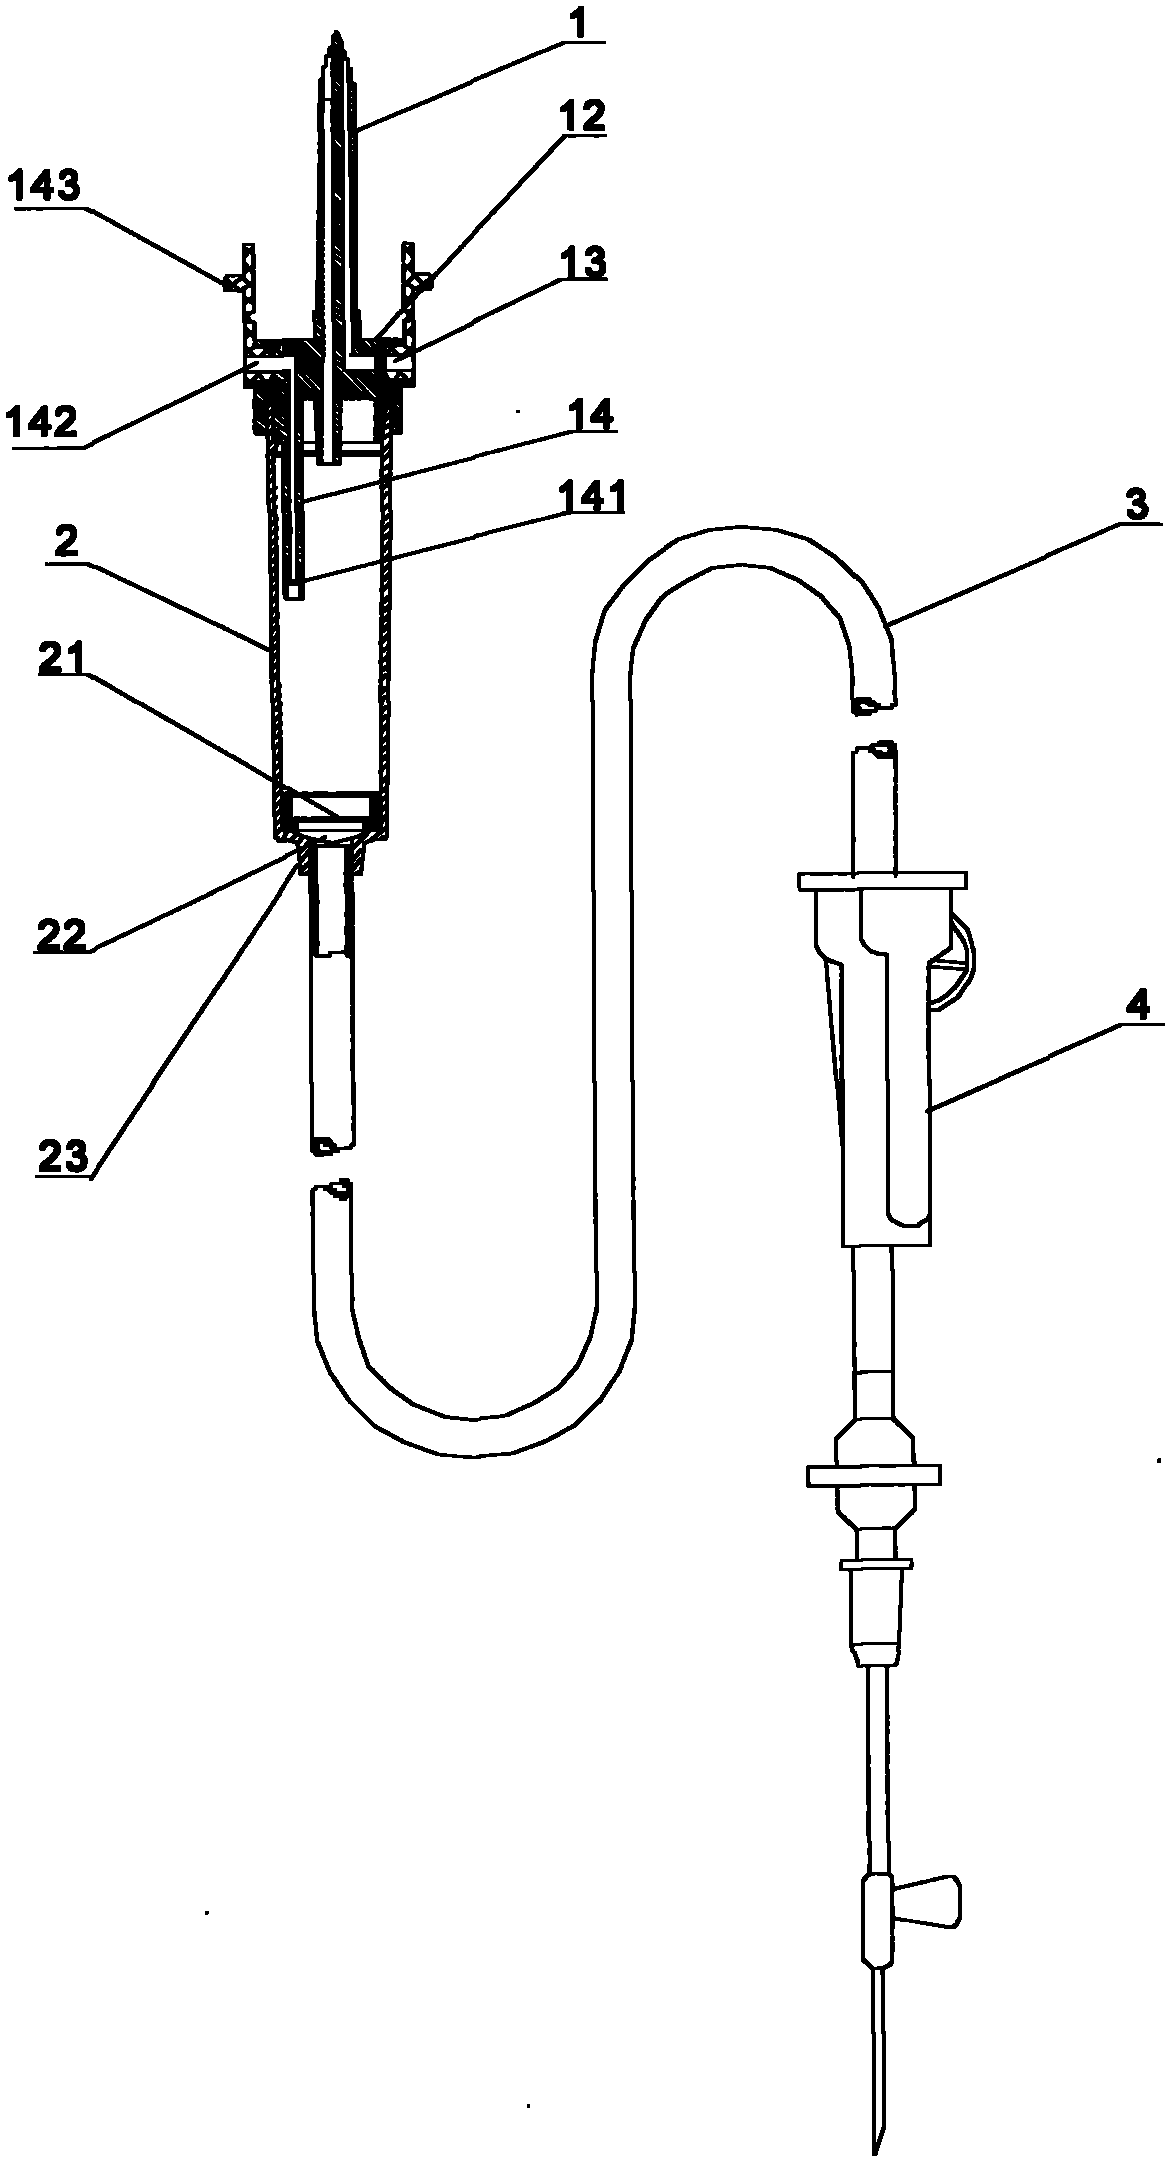 Manufacturing method of safe transfusion system based on bubbling point pressure principle